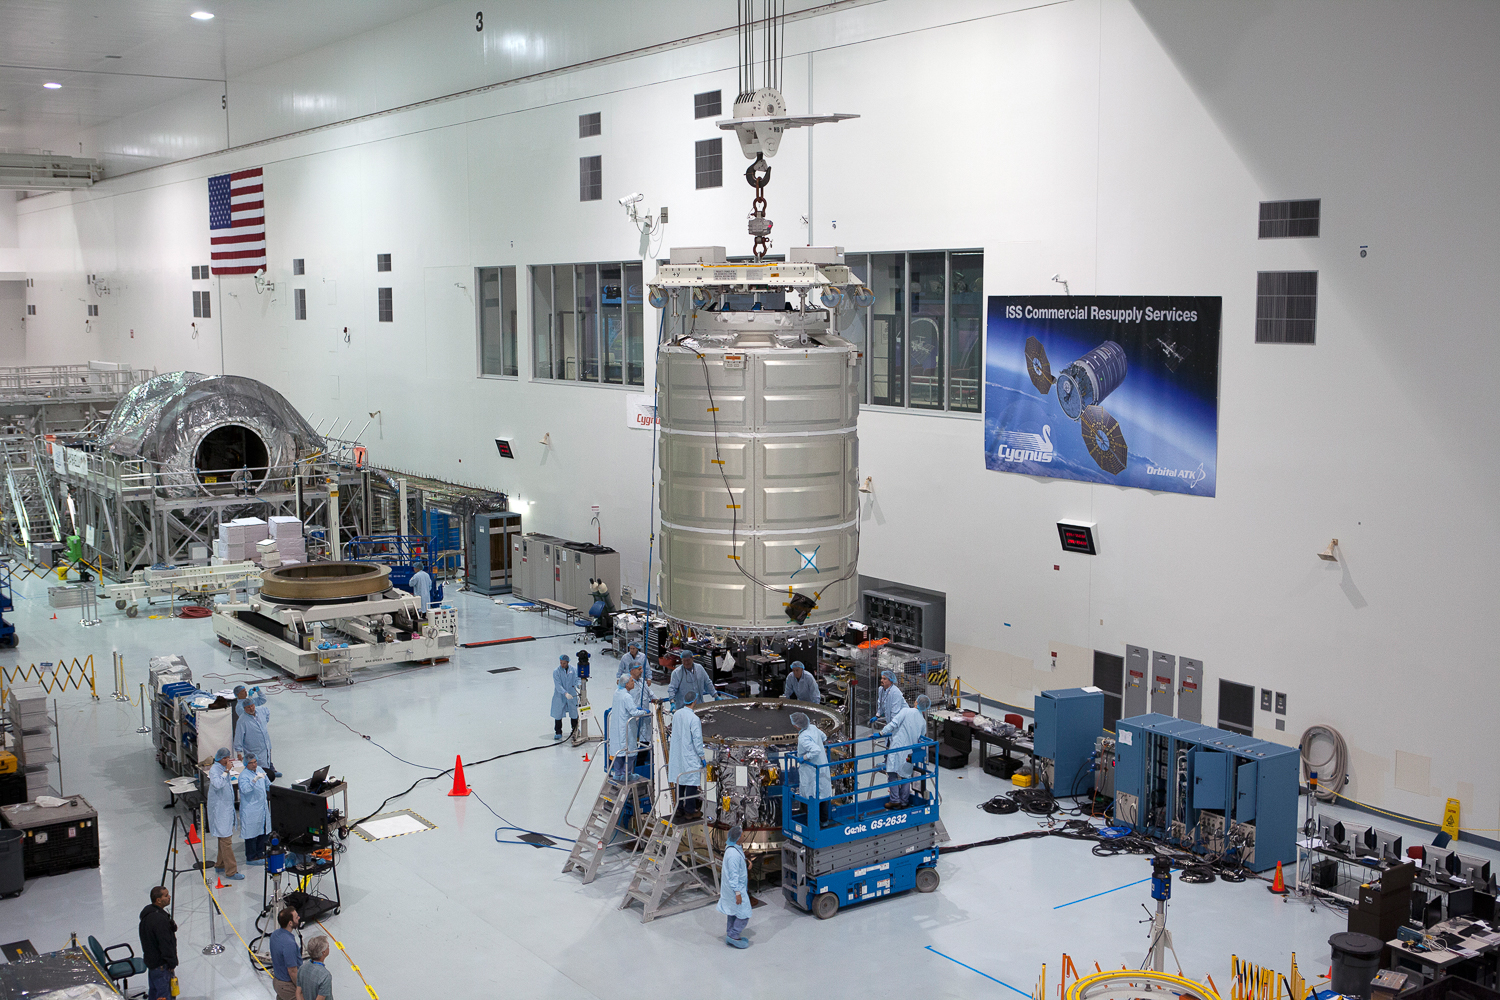 Engineers this week completed connecting the Pressurized Cargo Module with the Service Module to form the Cygnus spacecraft that will ferry more than 7,000 pounds of supplies, equipment and experiments to the International Space Station for NASA in December. The OA-4 mission is scheduled to launch atop a ULA Atlas-V rocket from Cape Canaveral, Fla. NET Dec. 3, 2015. Photo Credit: NASA